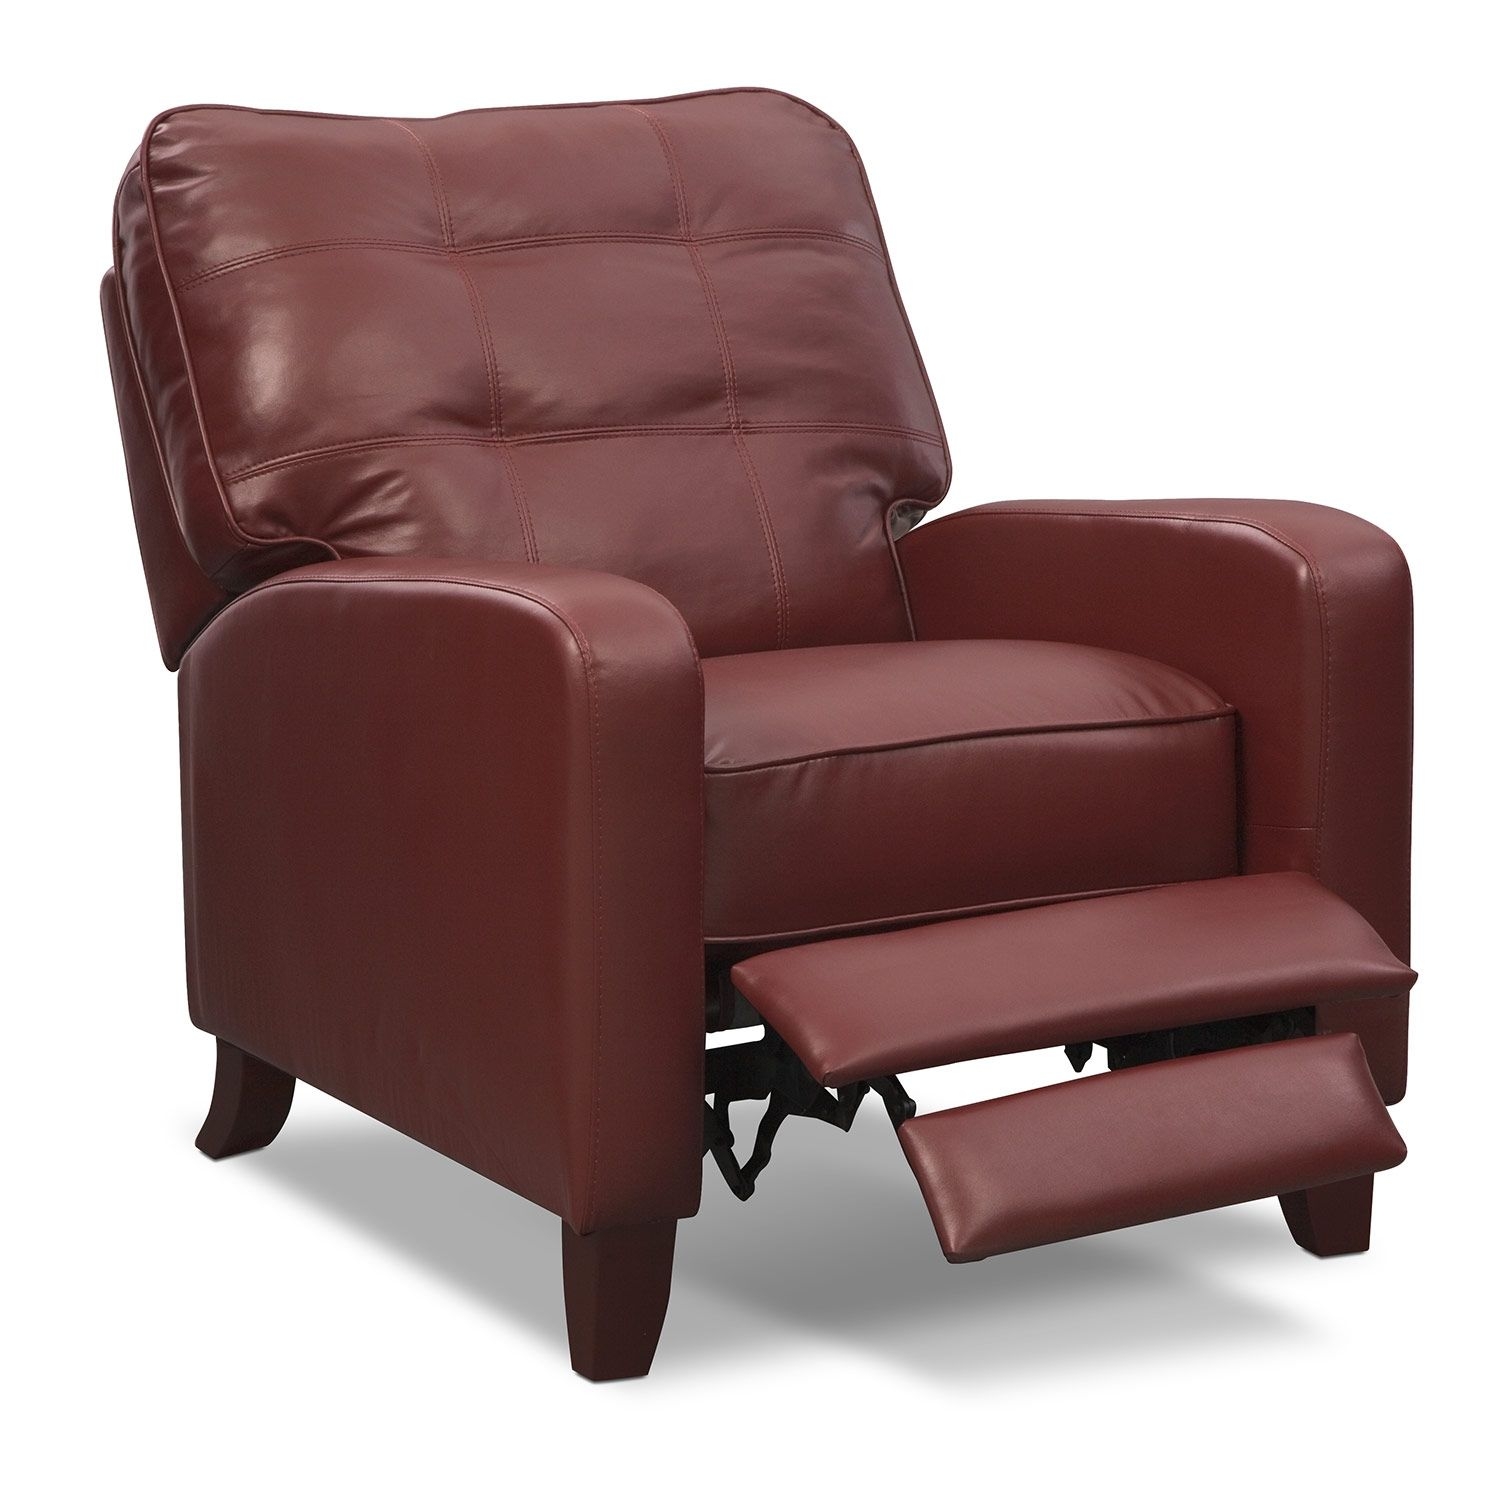 Low back recliners 3